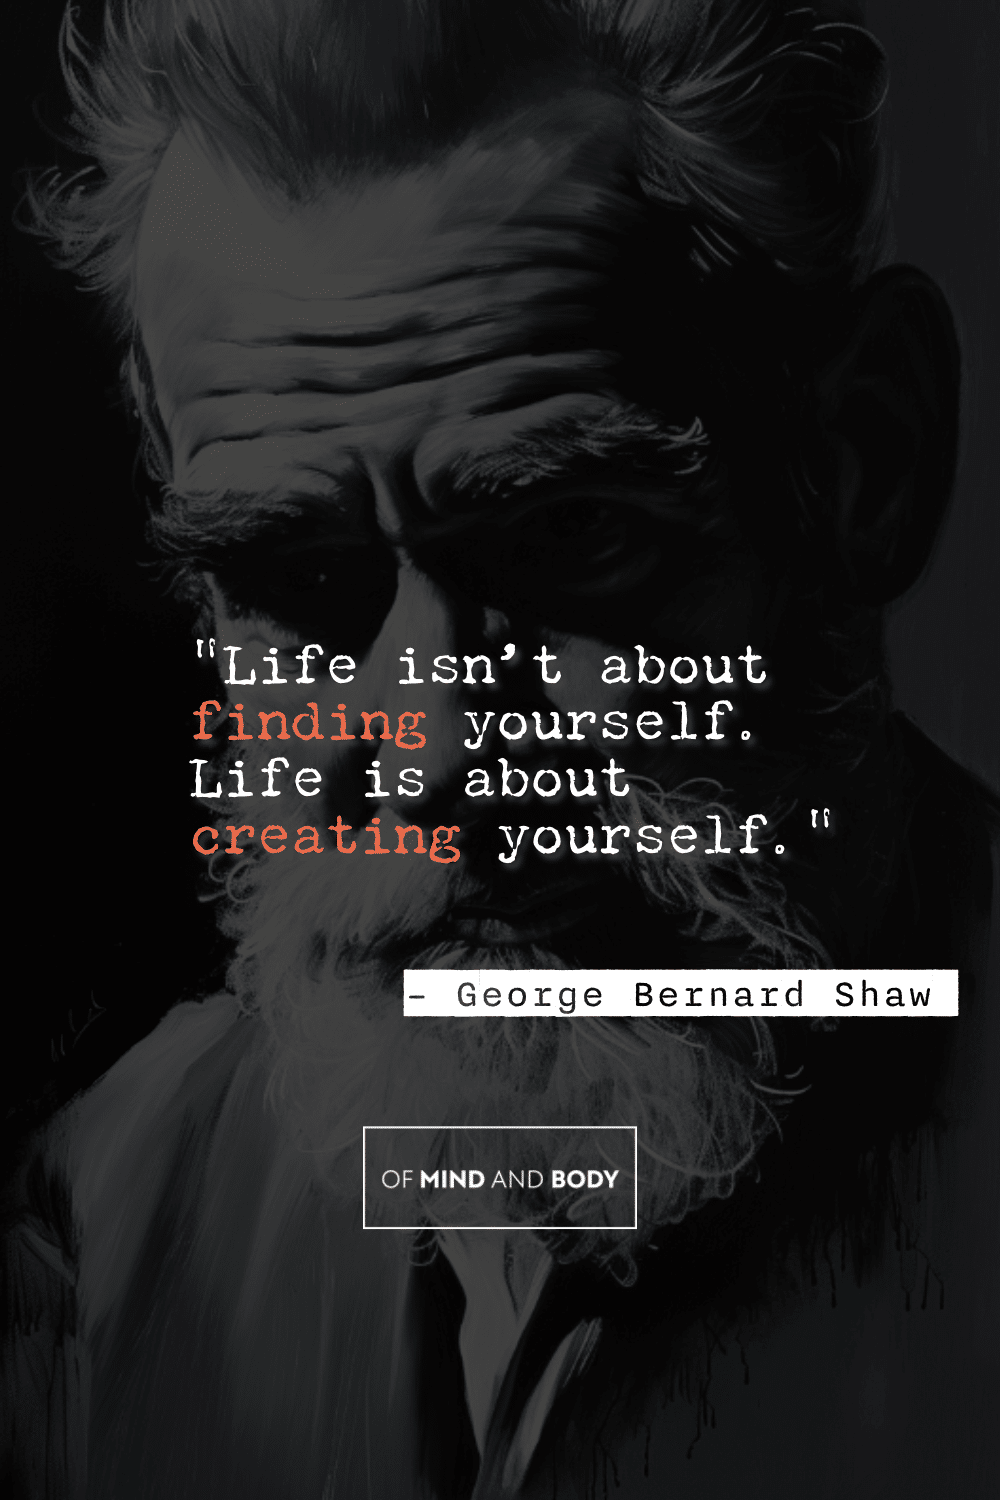 Quotes on Self Improvement - "Life isn’t about finding yourself. Life is about creating yourself."